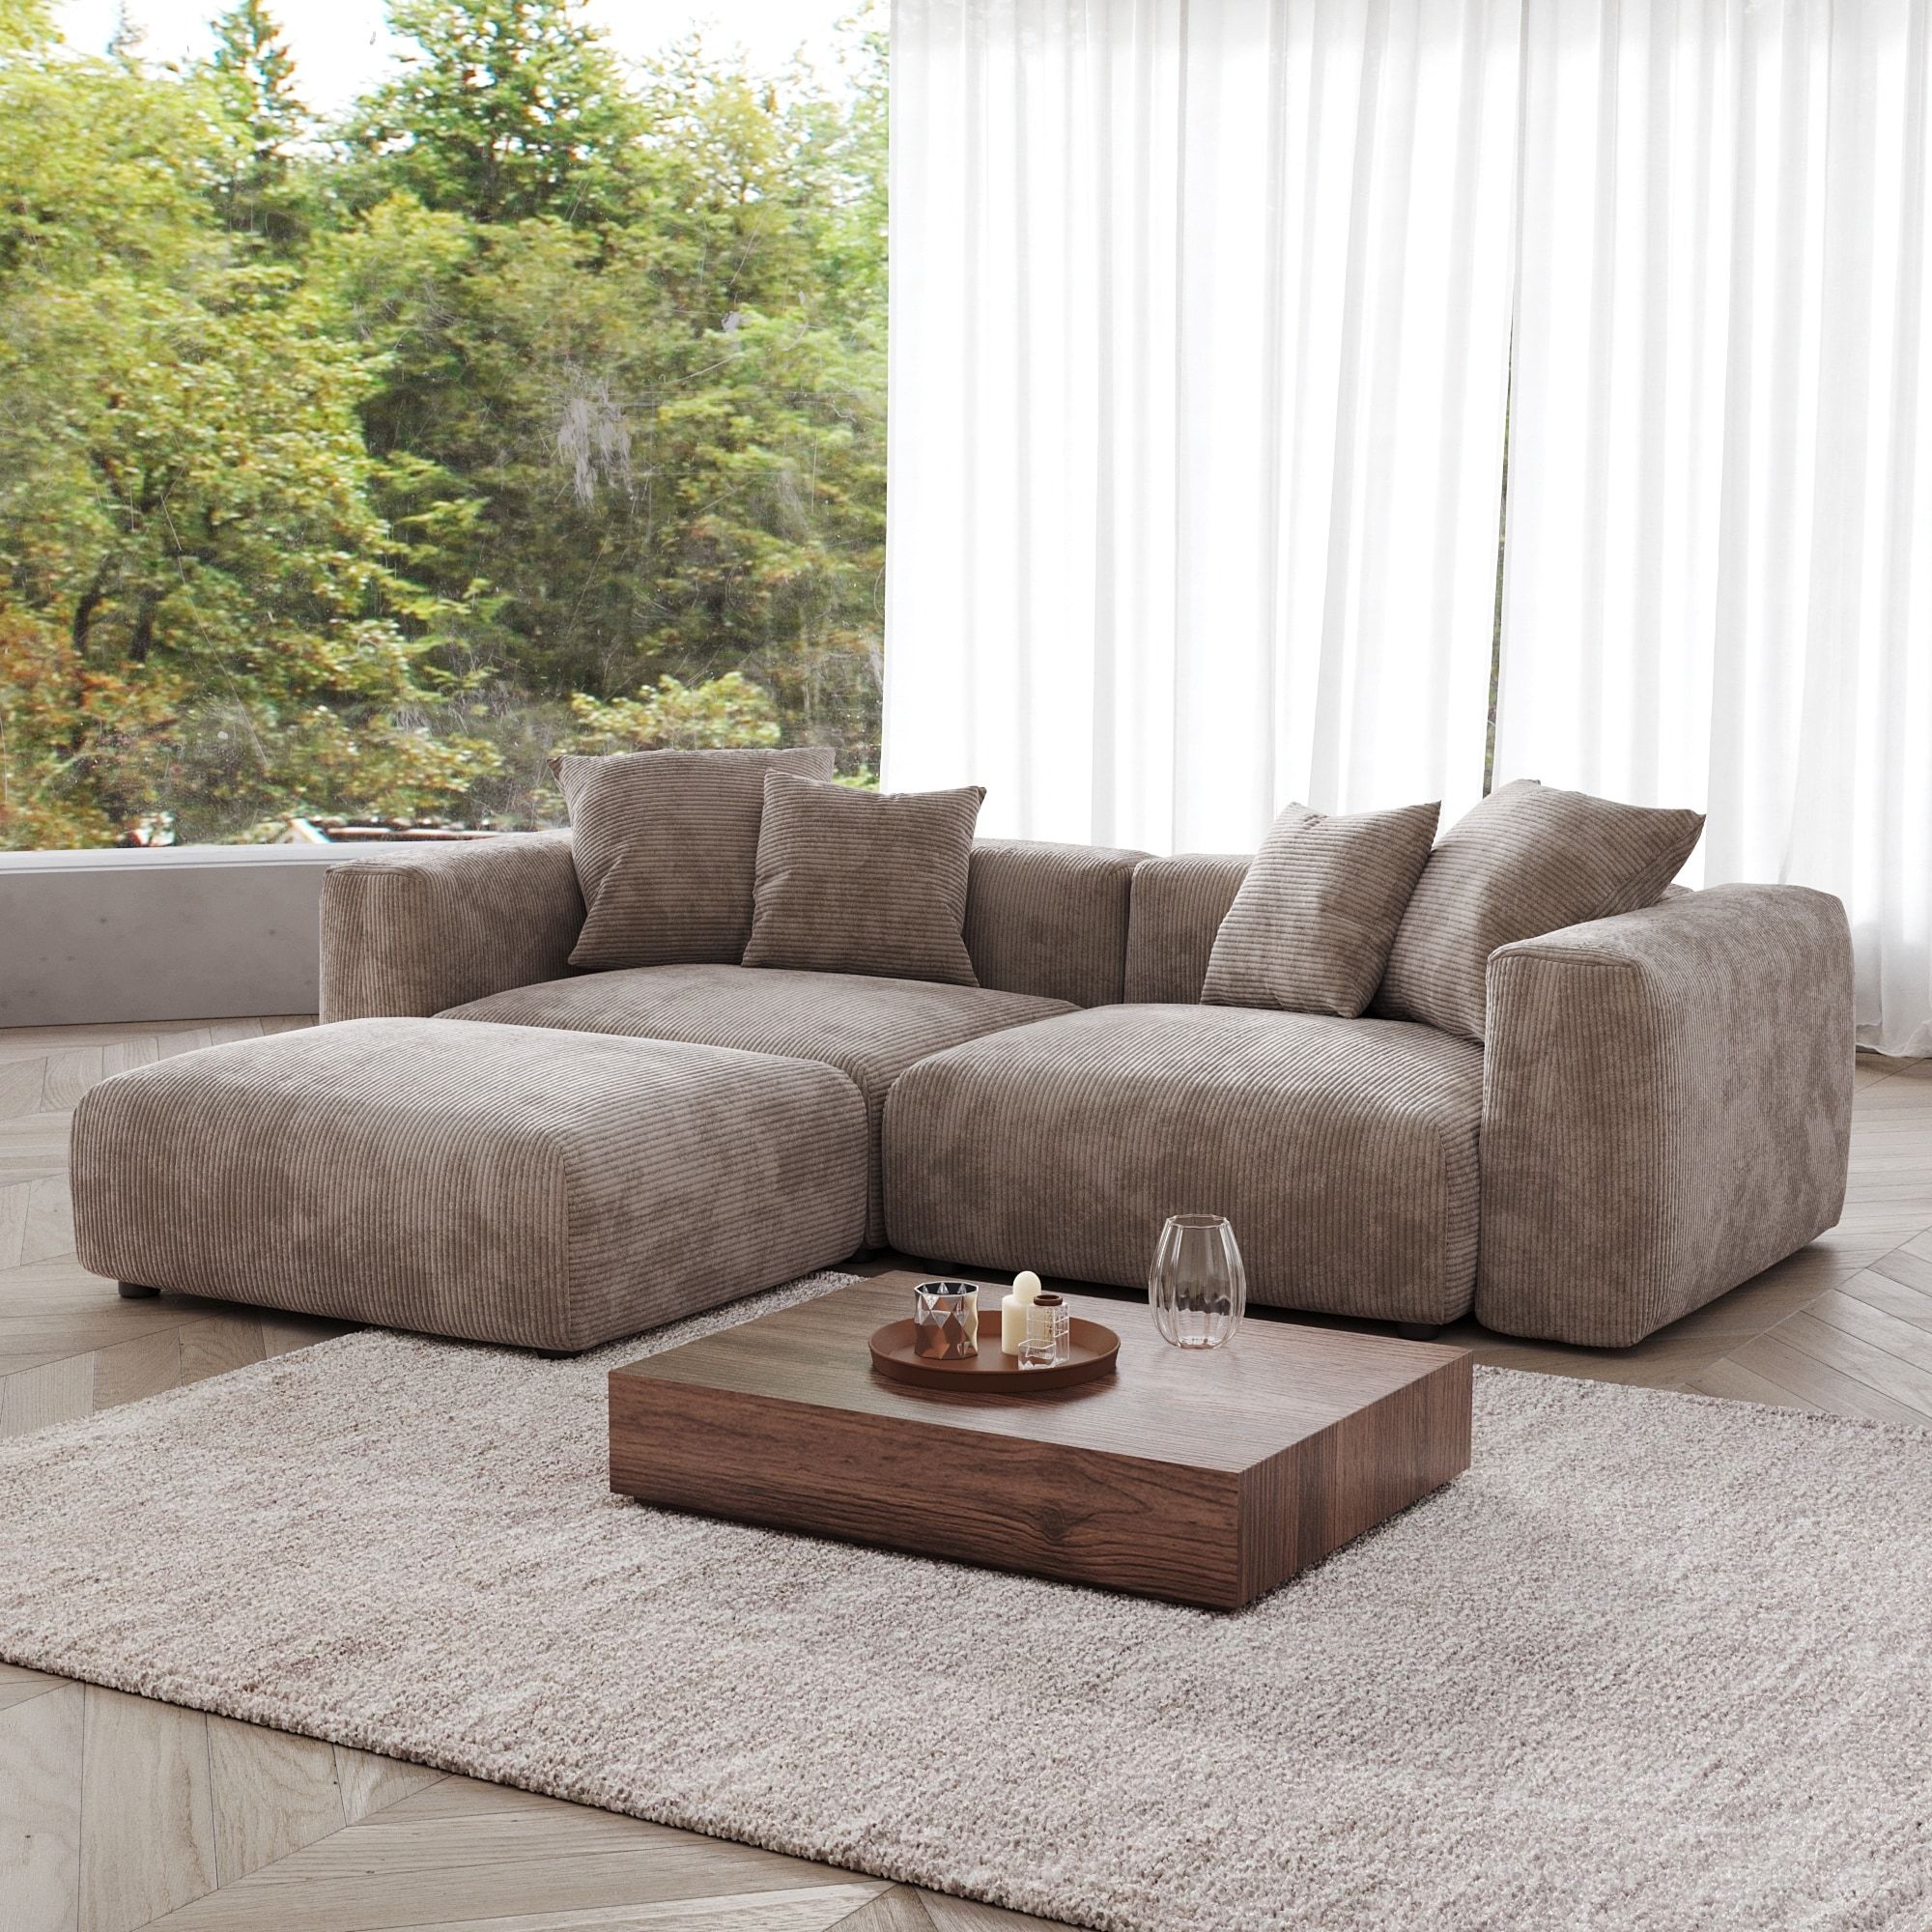 The Ultimate Guide to Choosing the Most Comfortable Sectional Sofa for Your Home